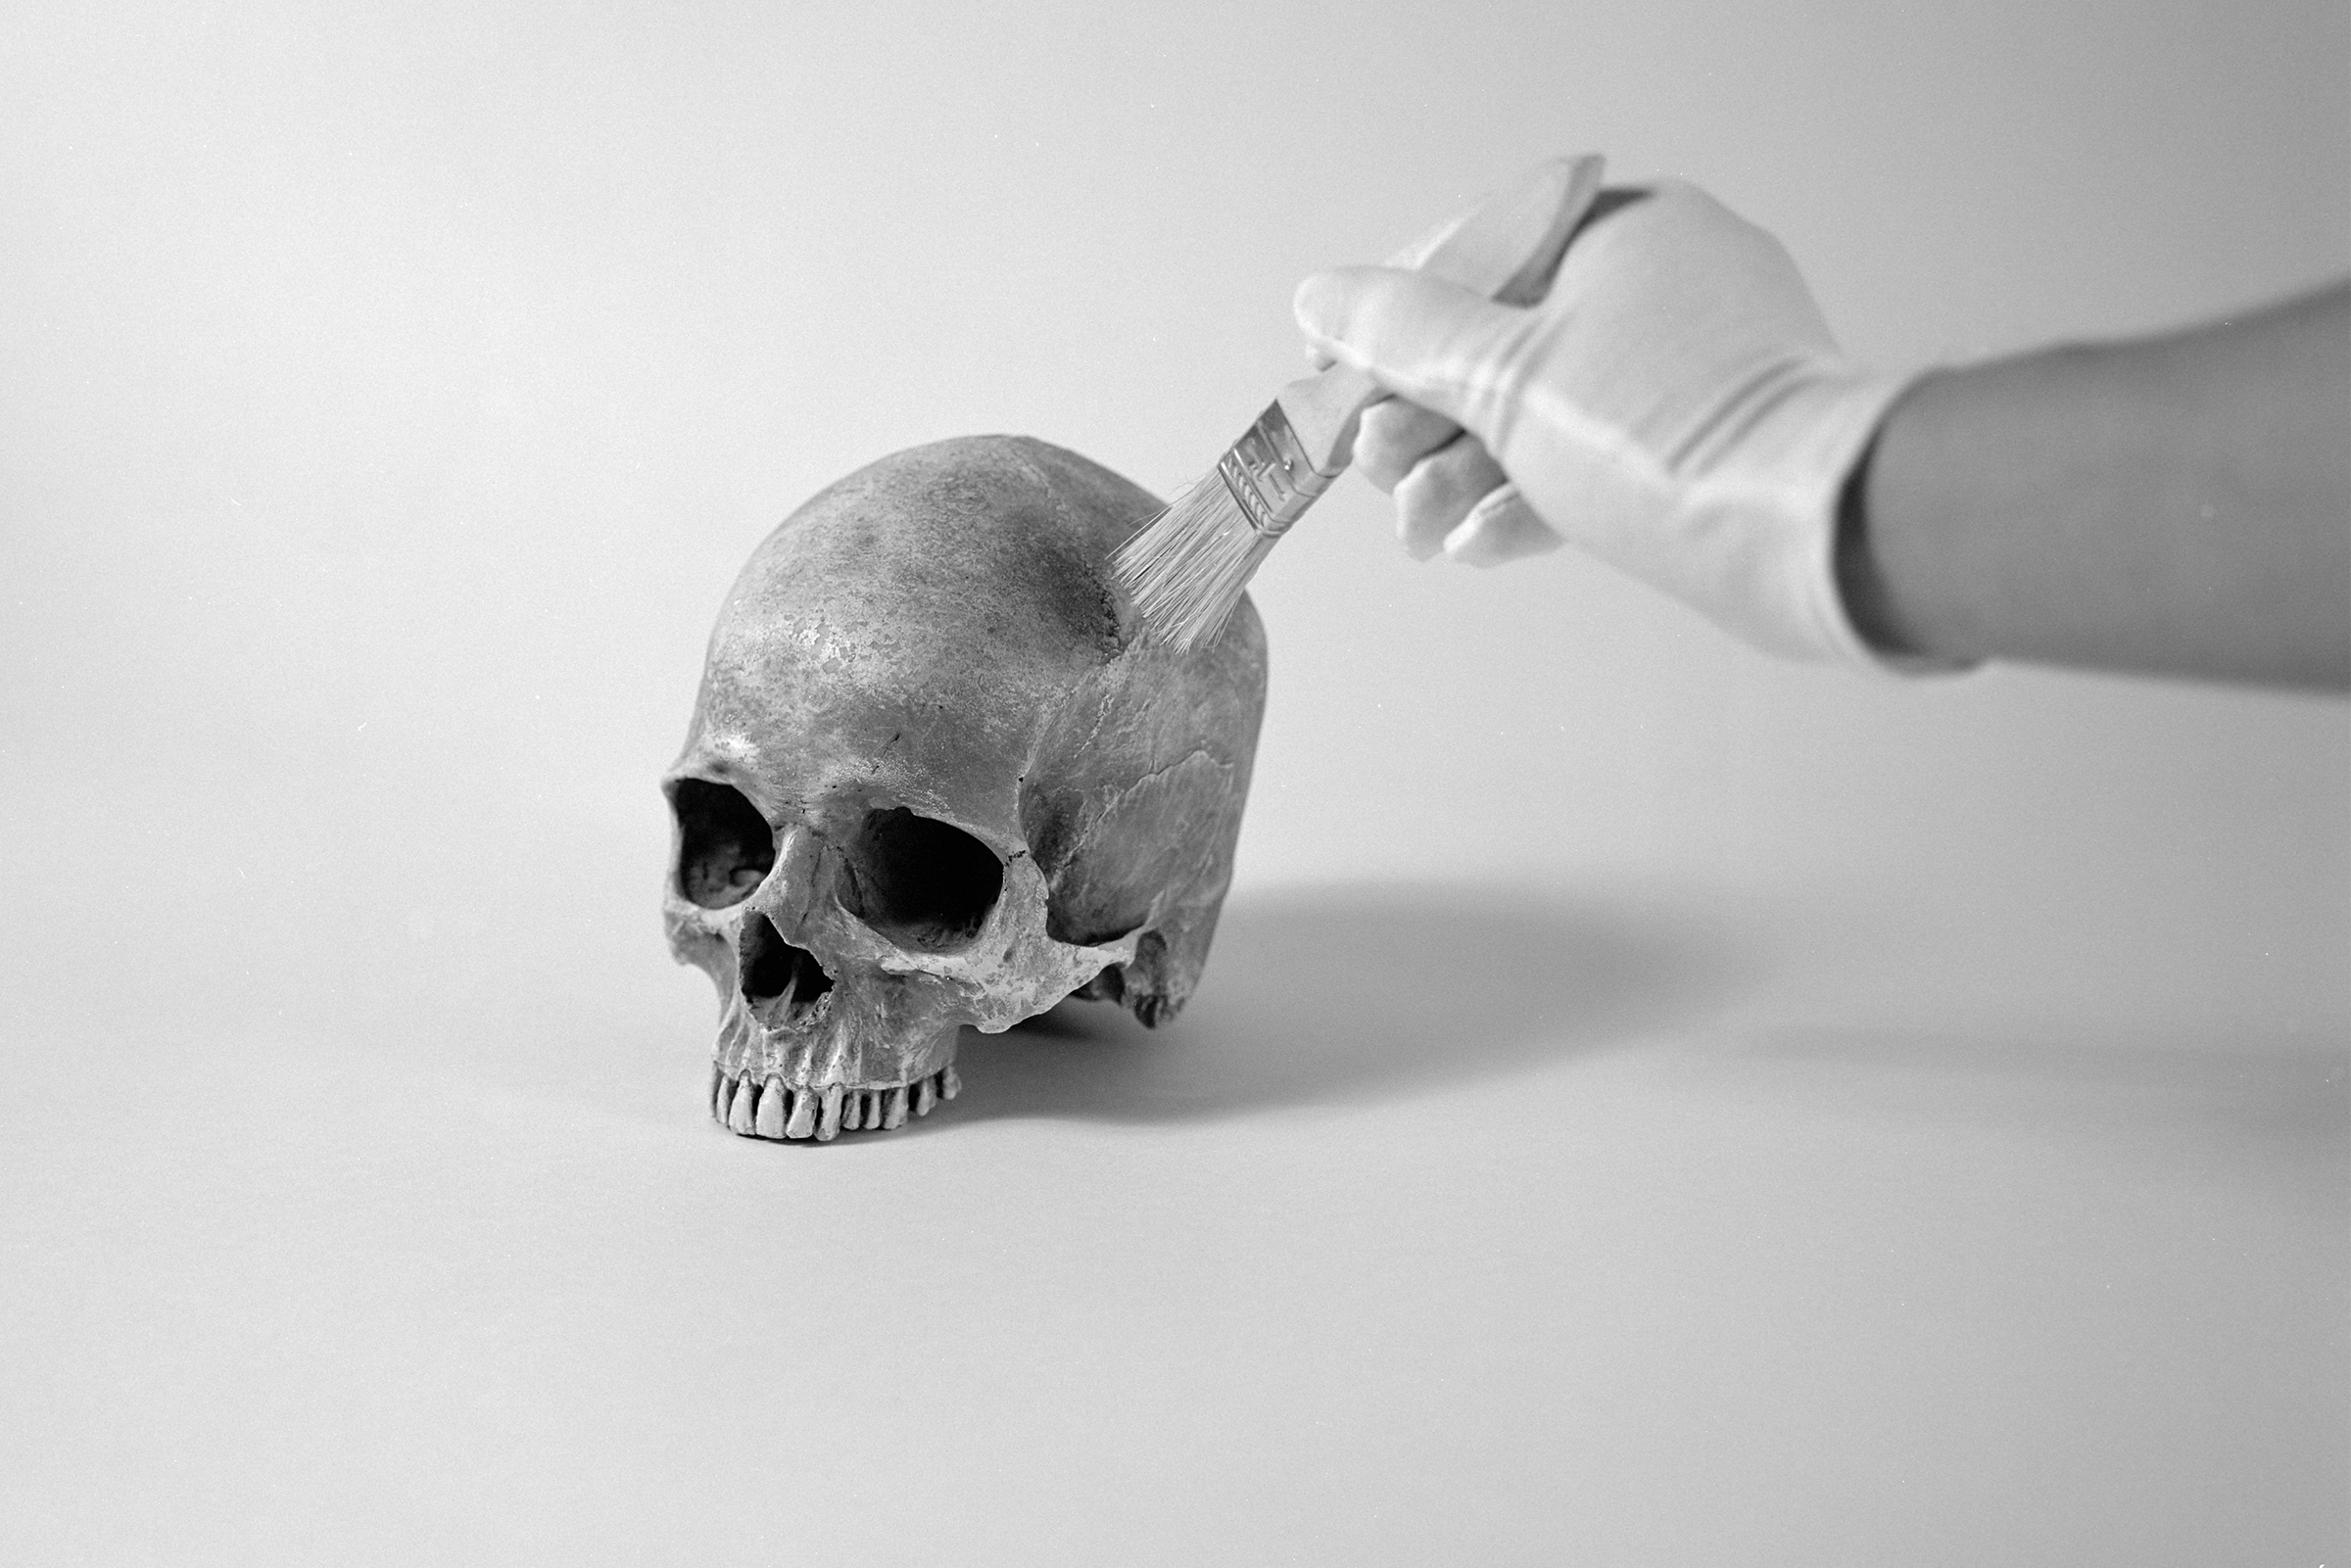 a disembodied hand brushes dust from a human skull